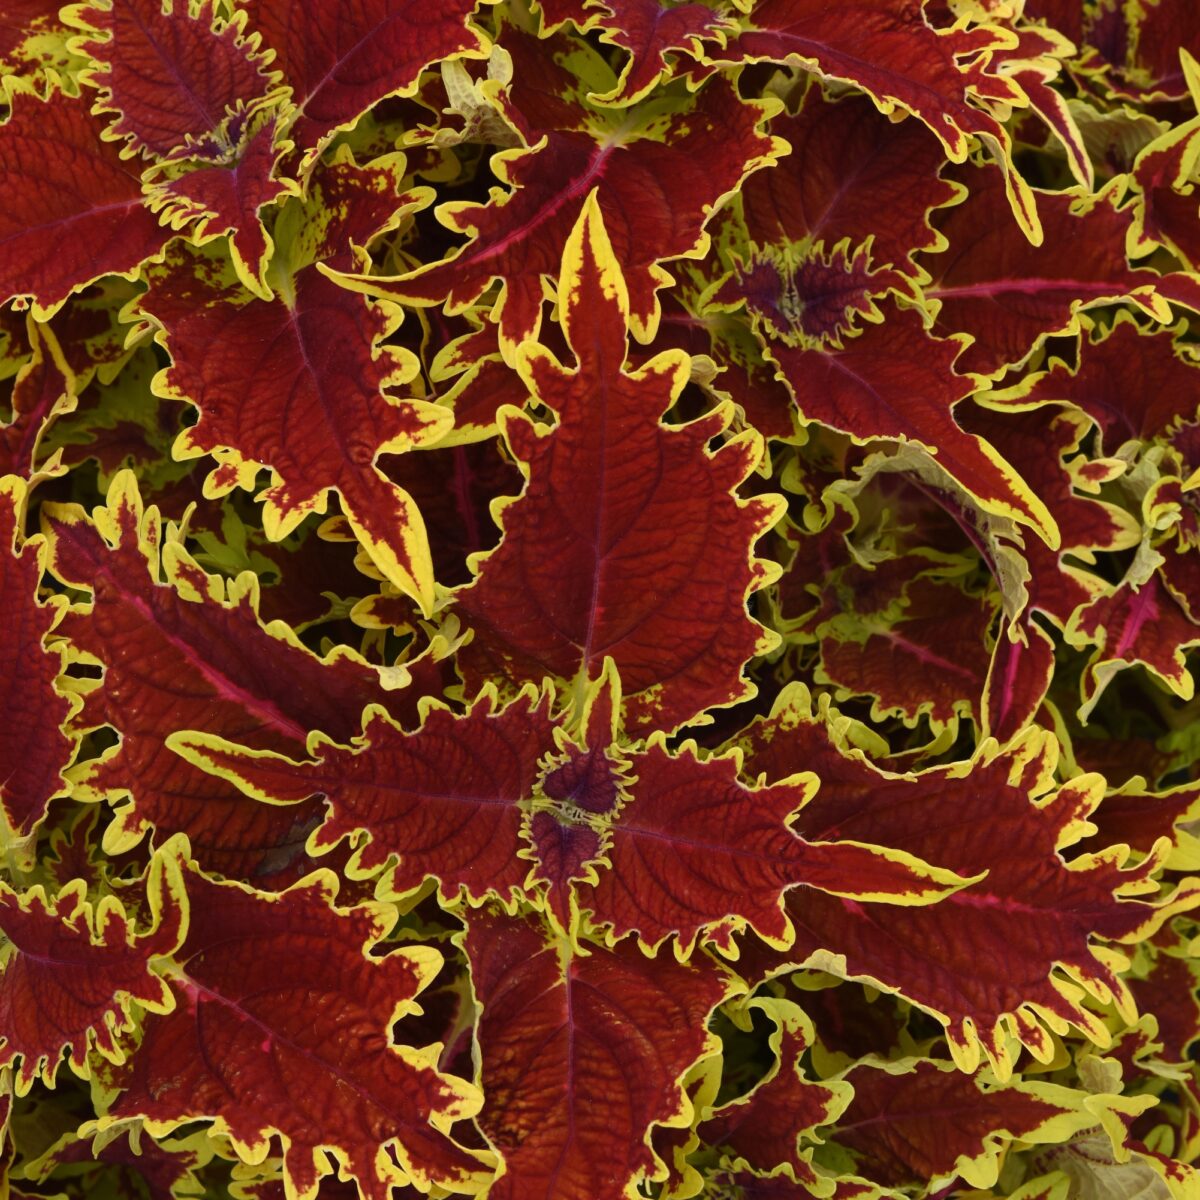 Vivid Vulcan Coleus leaves boasting fiery red centers, edged with sunny yellow margins